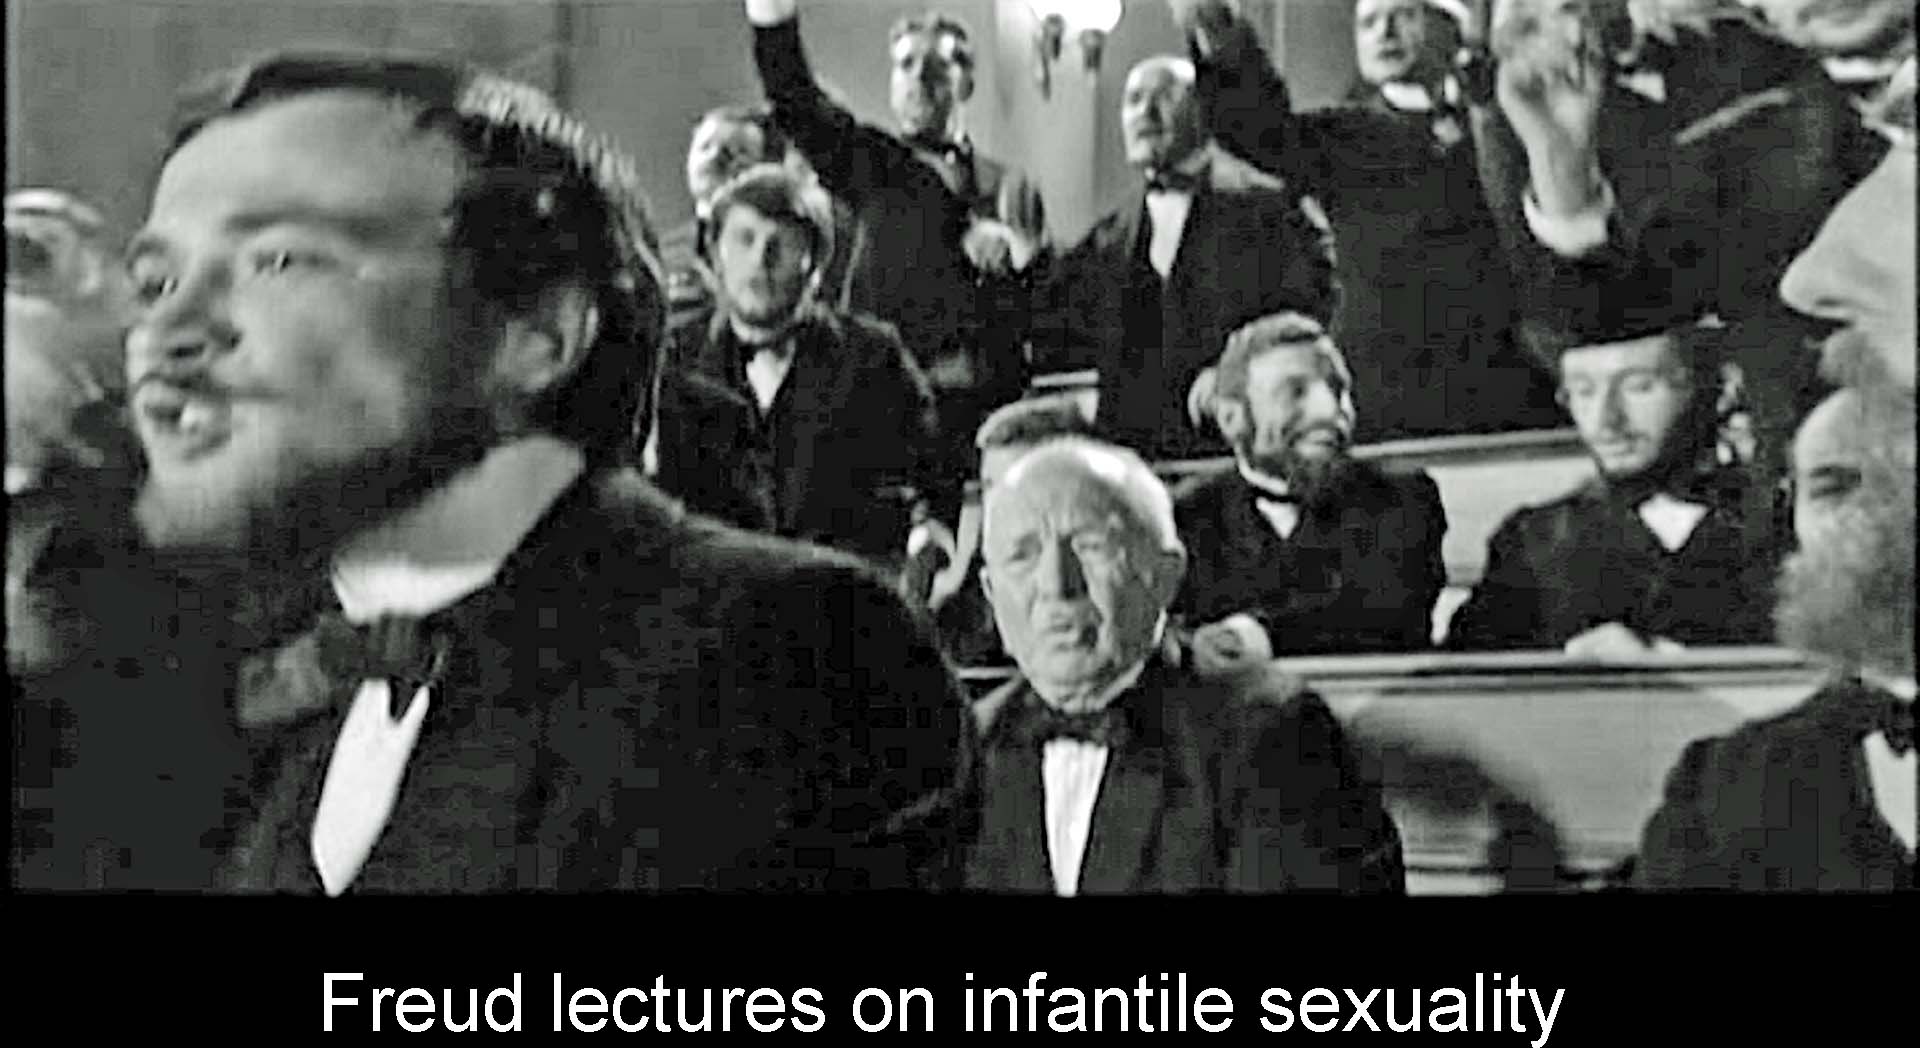 Freud's lecture on infantile sexuality